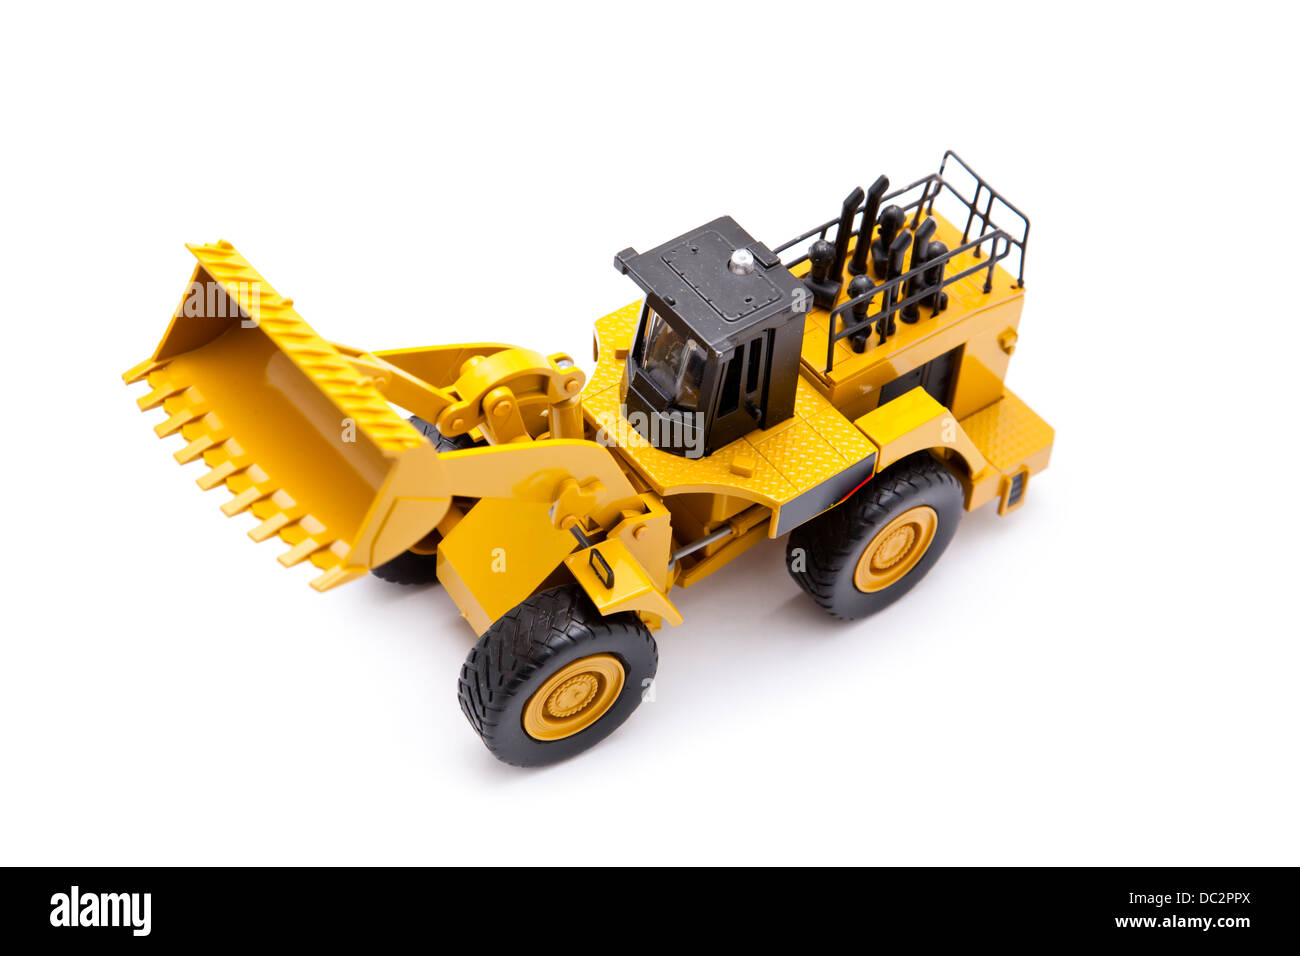 Toy model of truck on white background Stock Photo